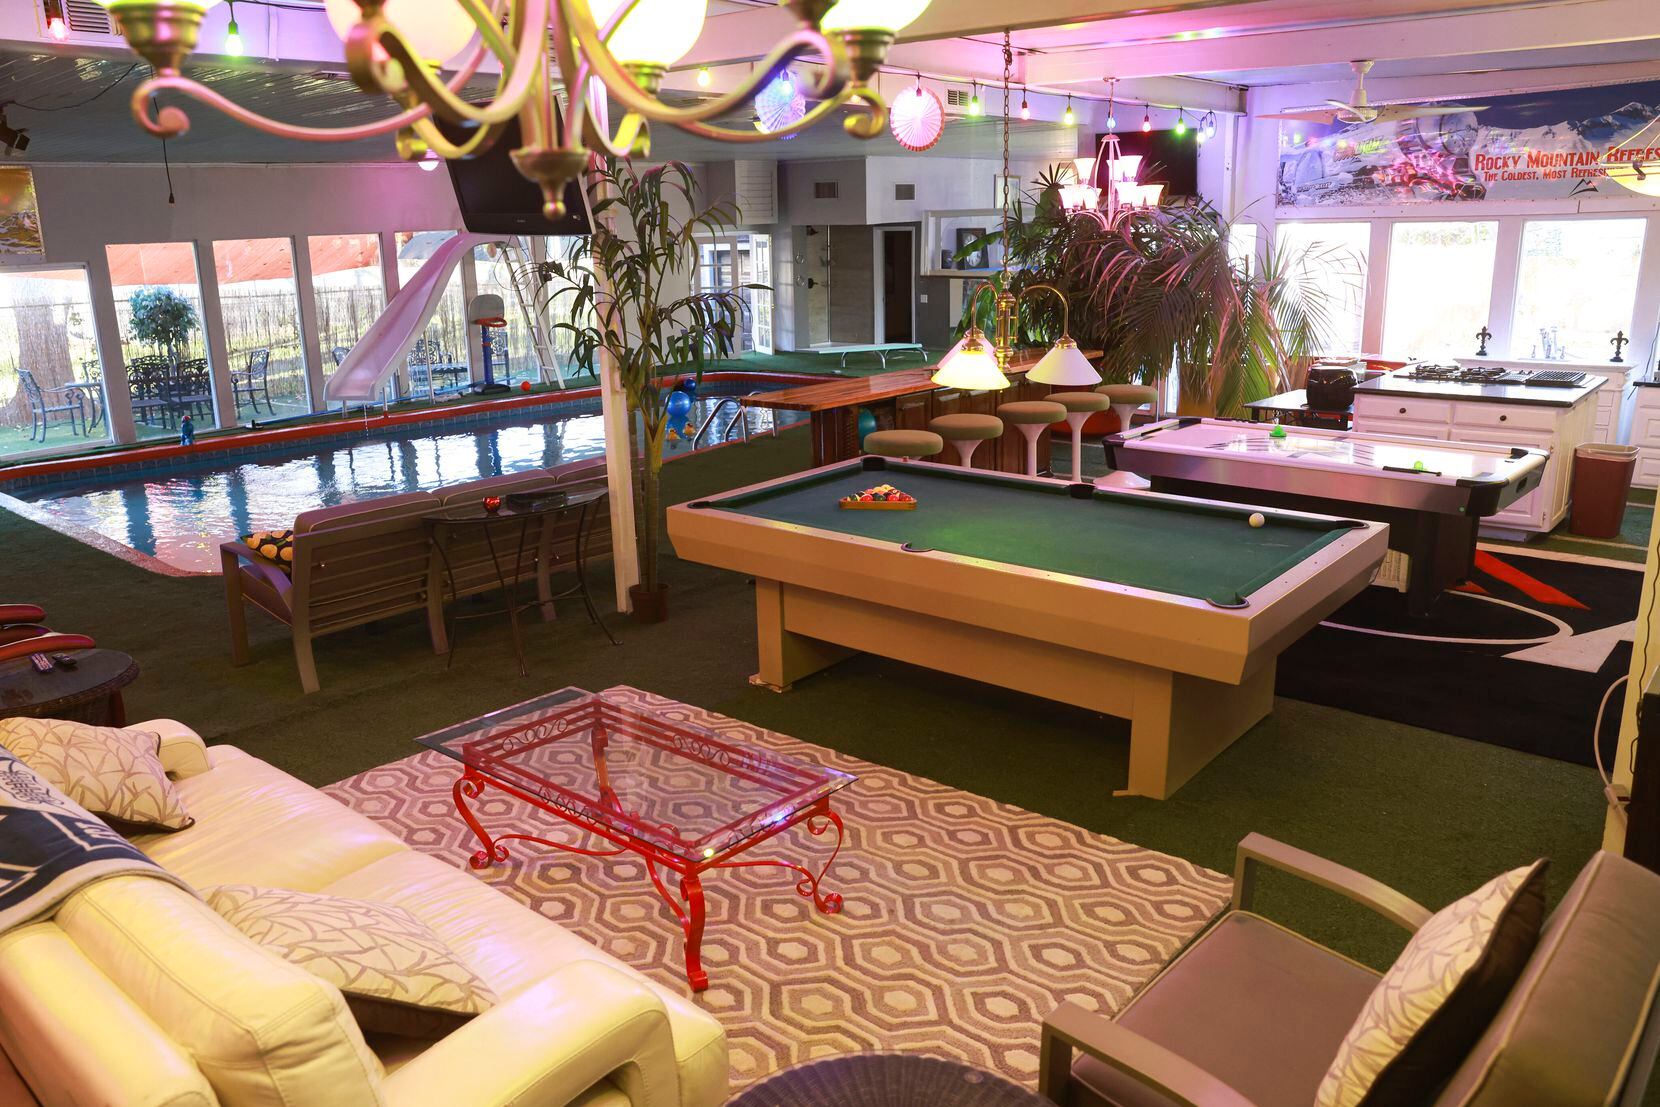 The enclosed area in the back of Jimmy Bradley's Fort Worth house includes plenty of games...